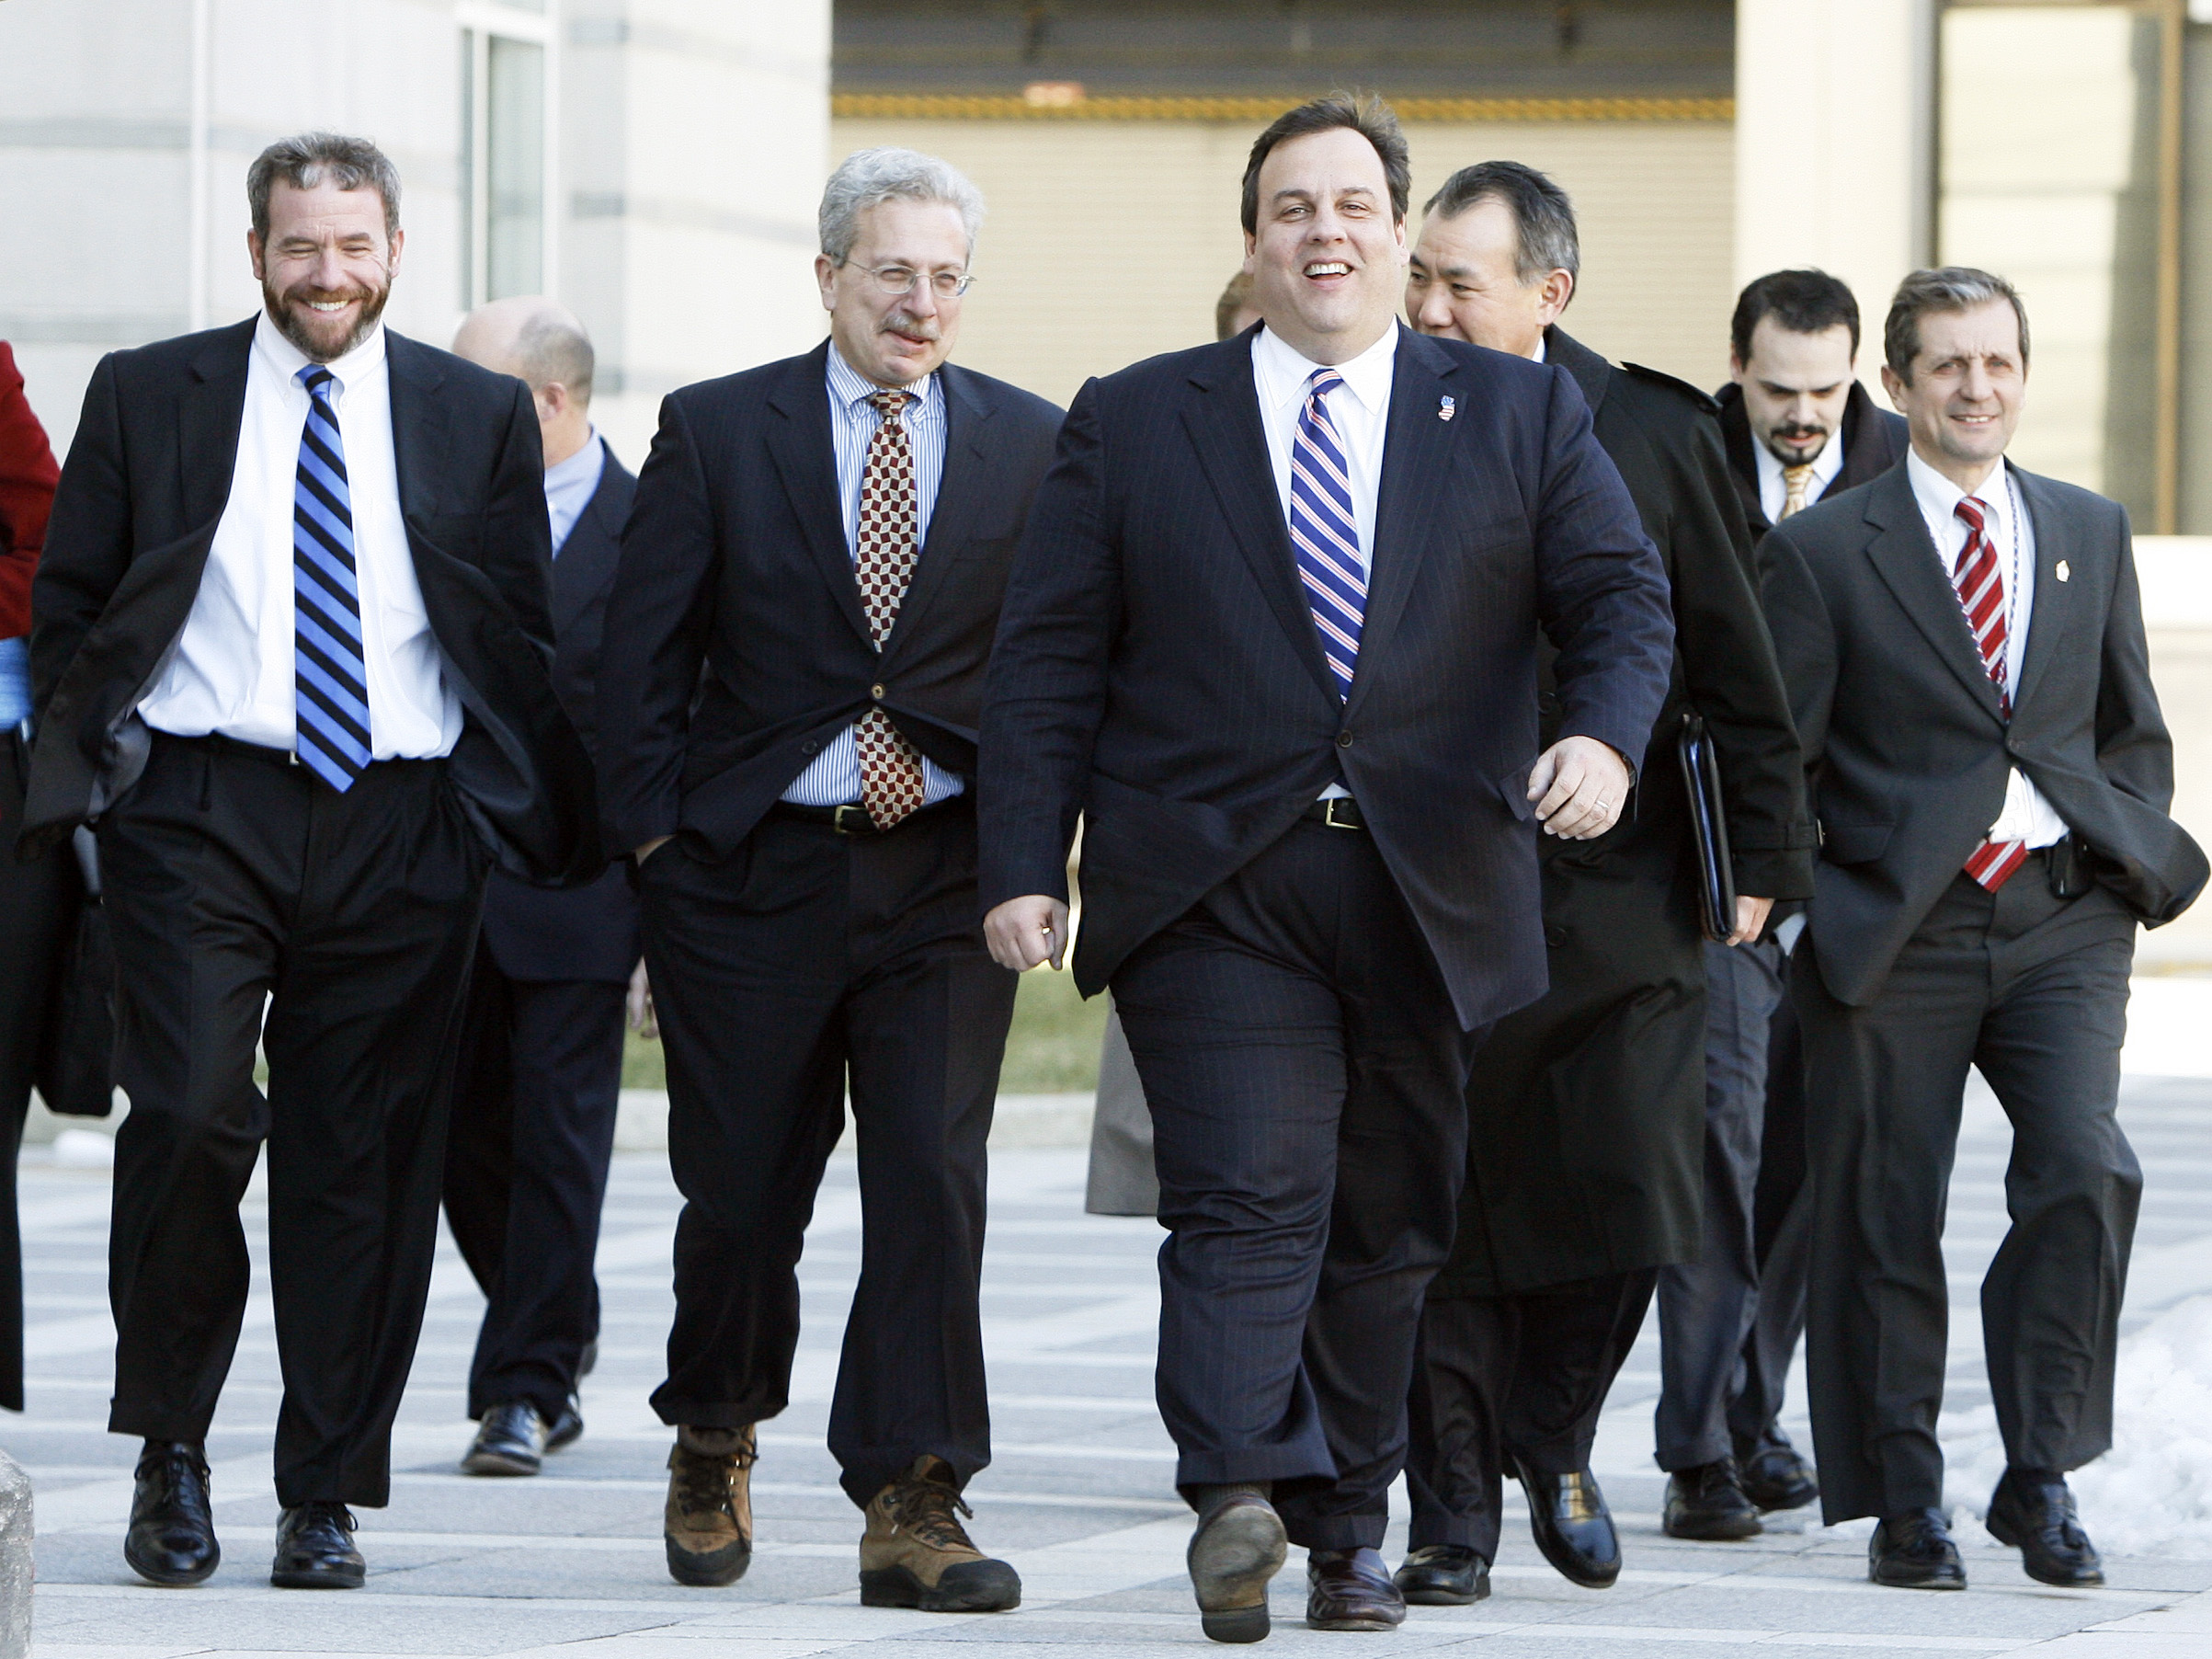 Then-U.S. Attorney Chris Christie heads to a news conference following the indictment of N.J. Senator Joseph Coniglio in Newark, N.J. on Feb. 14, 2008. (William Perlman—The Star-Ledger/Corbis)